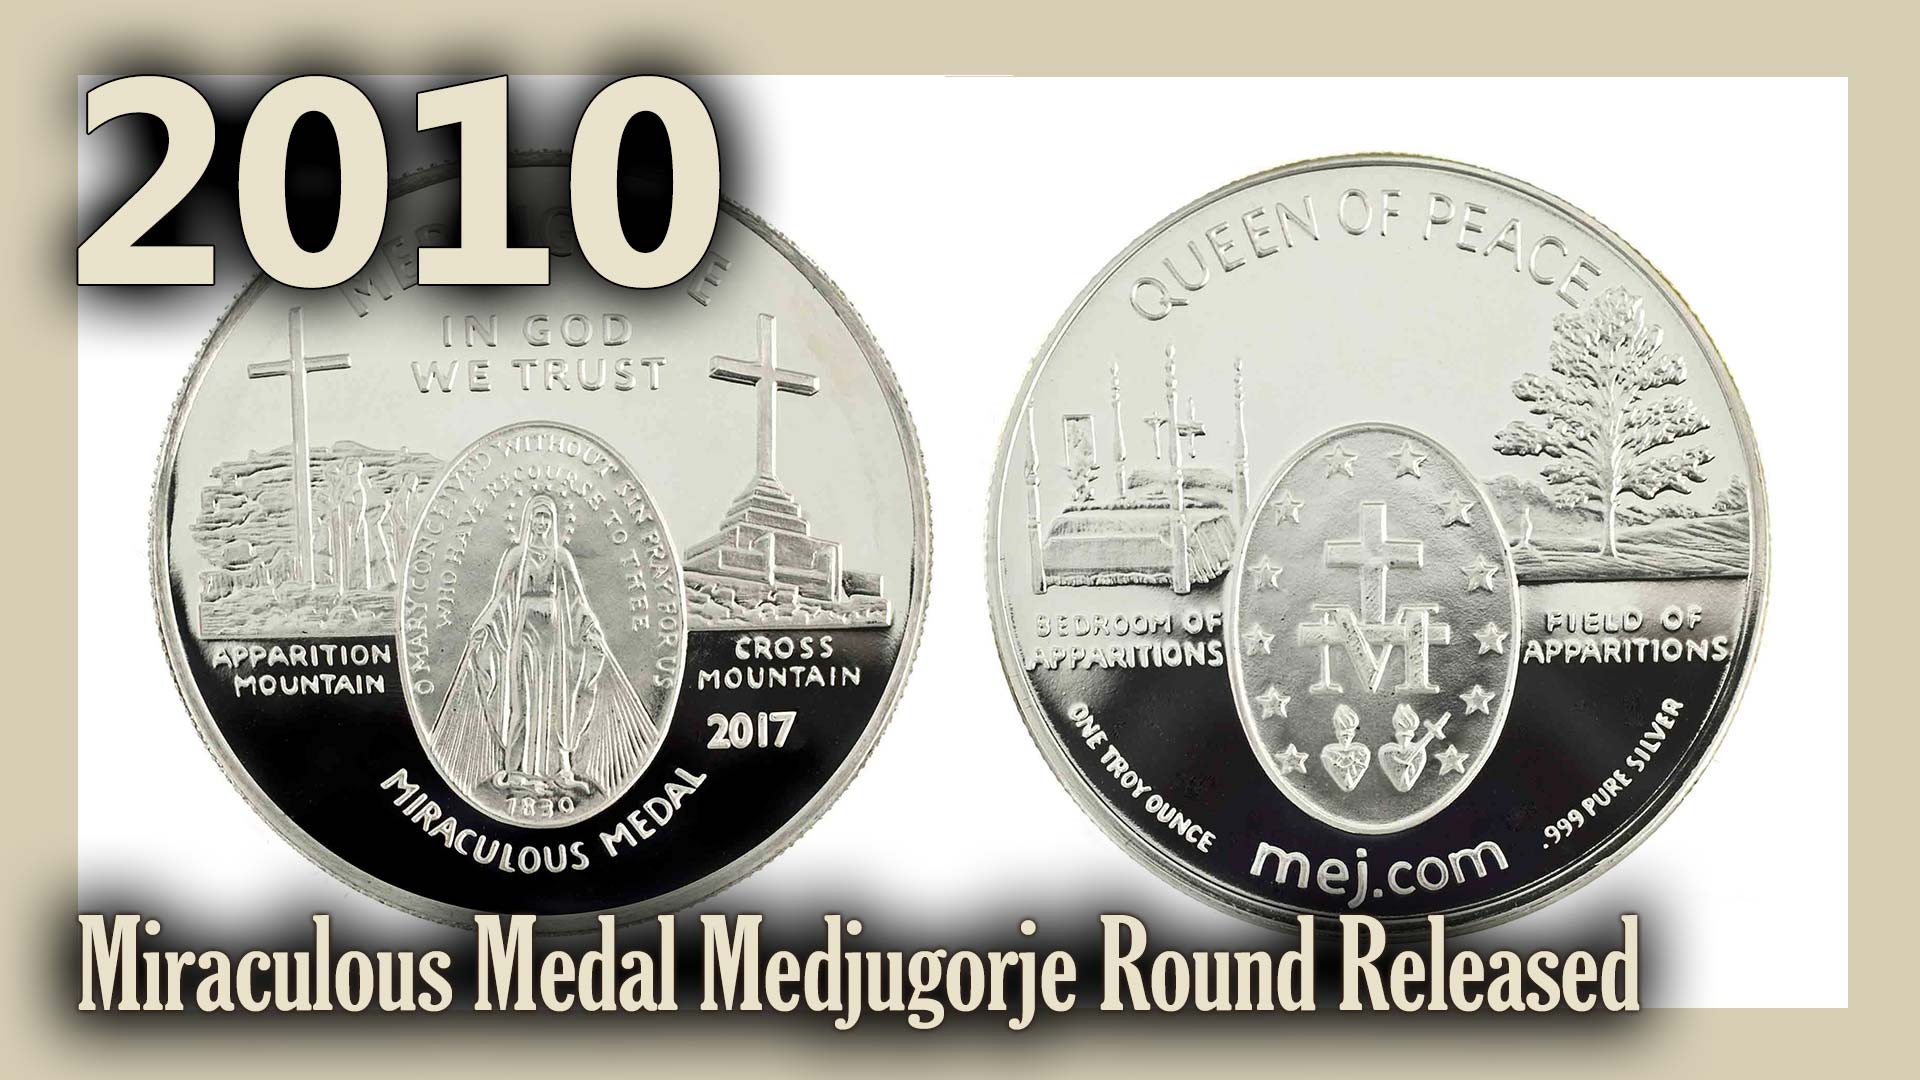 Miraculous Medal Medjugorje Round